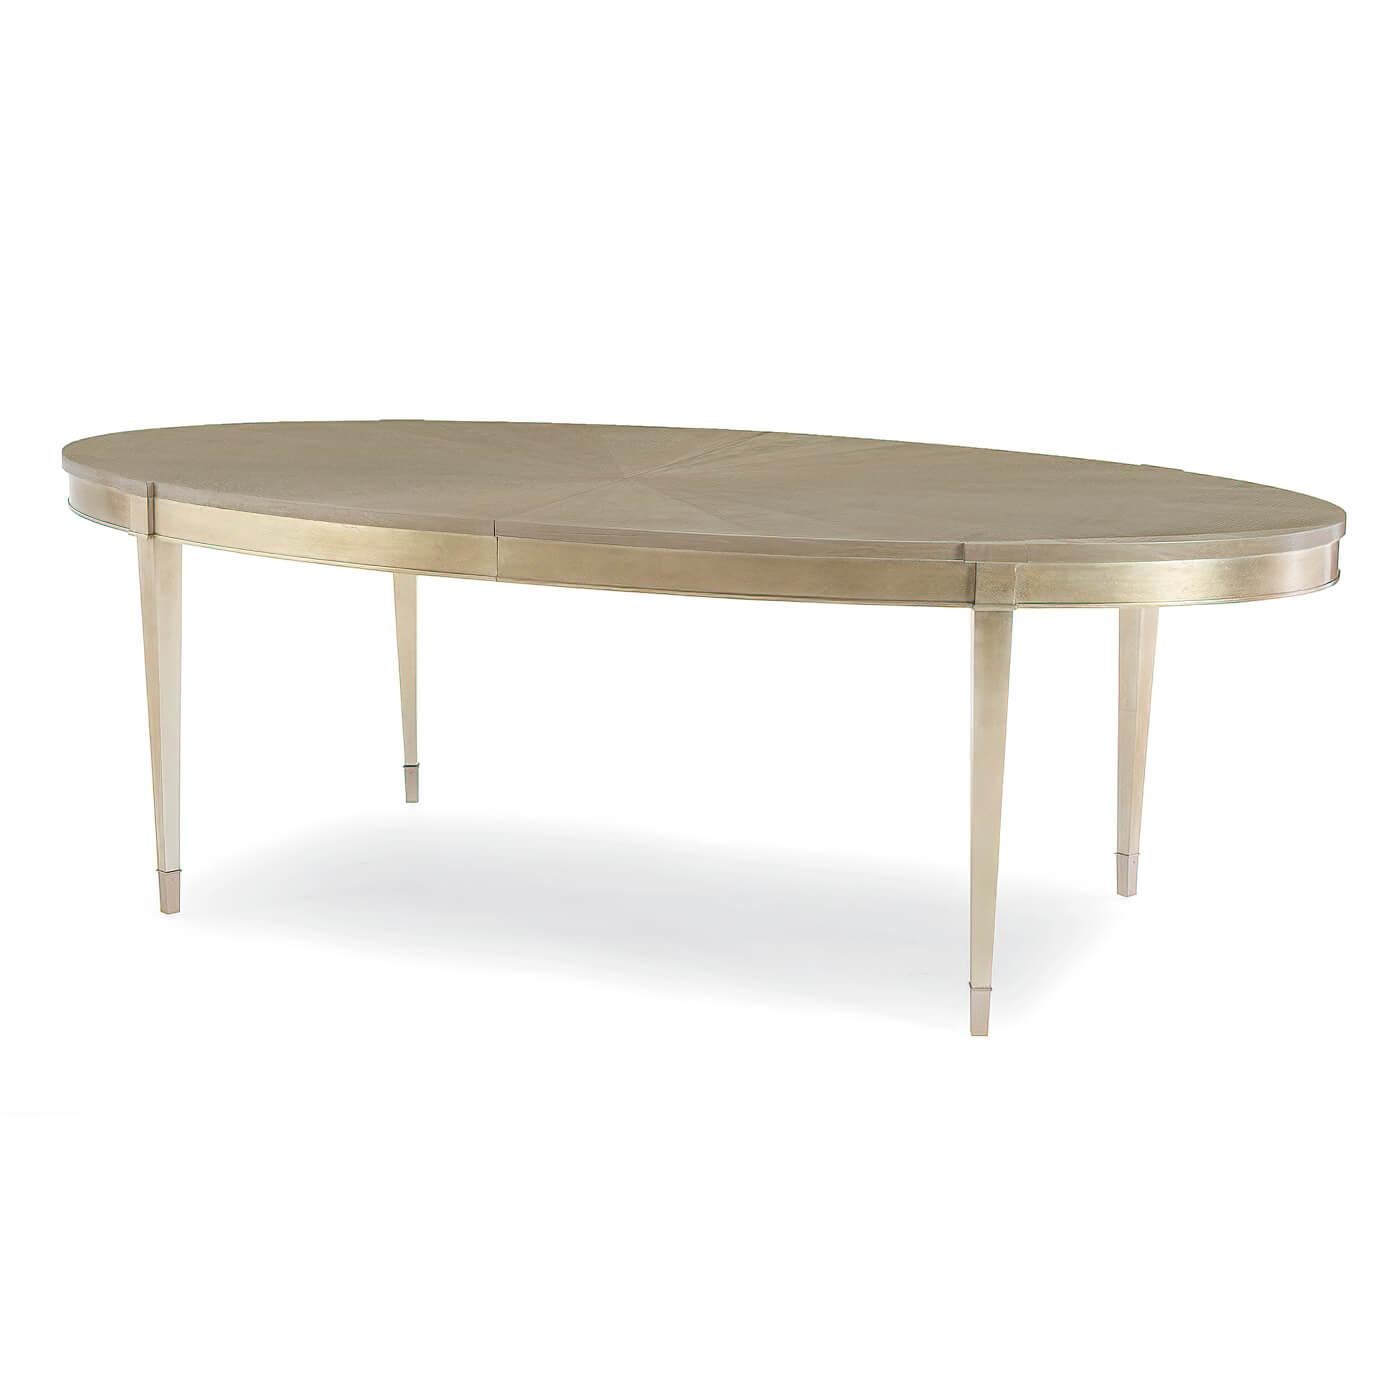 Contemporary French Neoclassical Oval Extending Dining Table For Sale